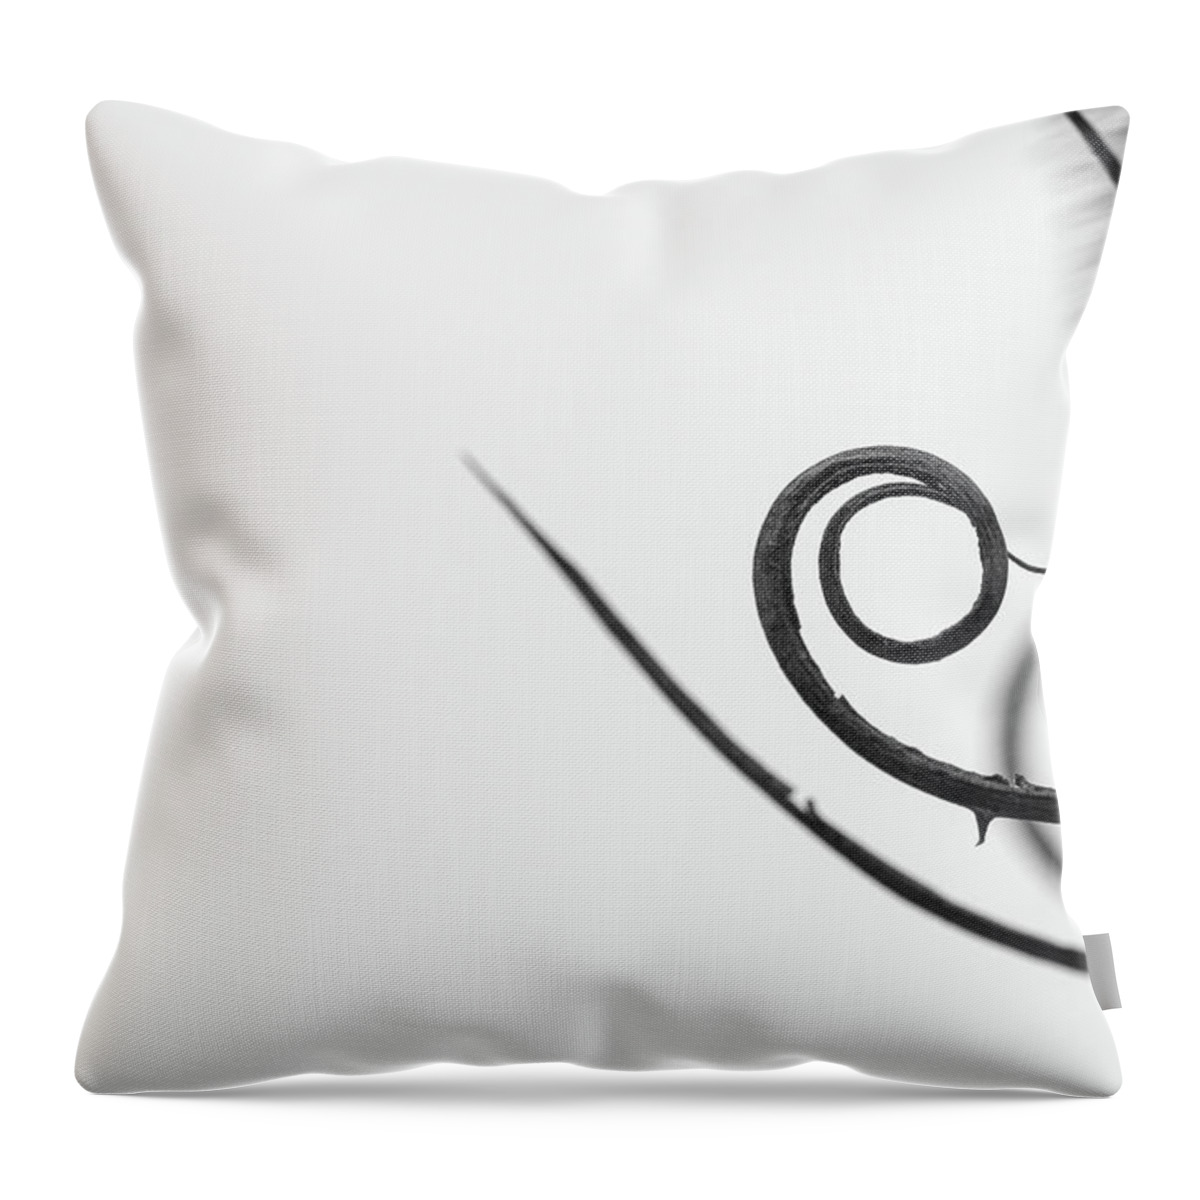 Abstract Throw Pillow featuring the photograph Golden Spiral Flower by Martin Vorel Minimalist Photography